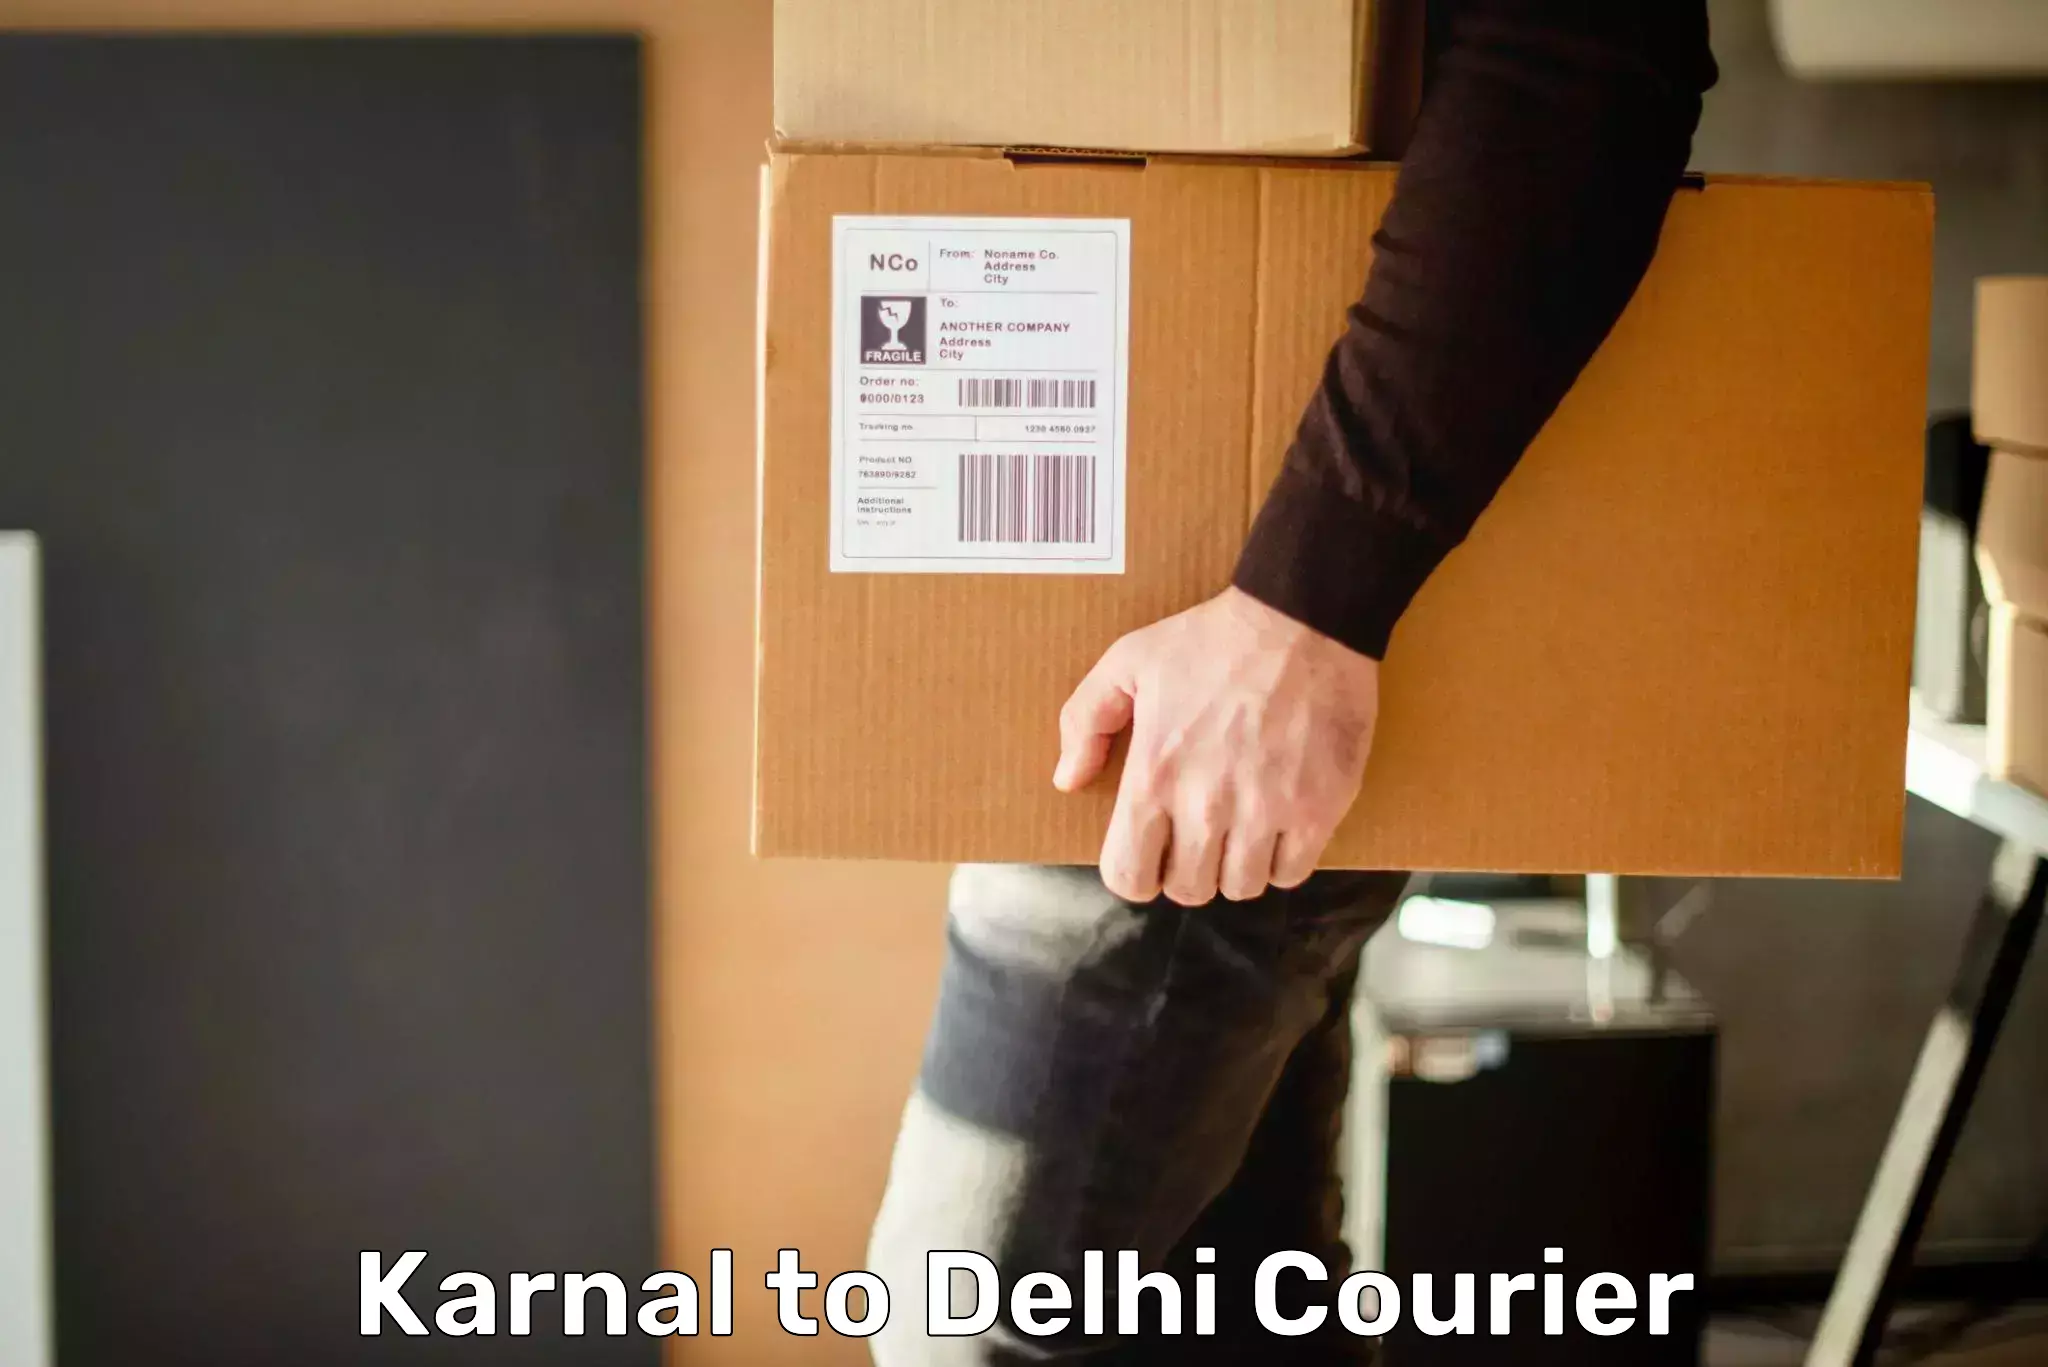 Next-day delivery options Karnal to Lodhi Road